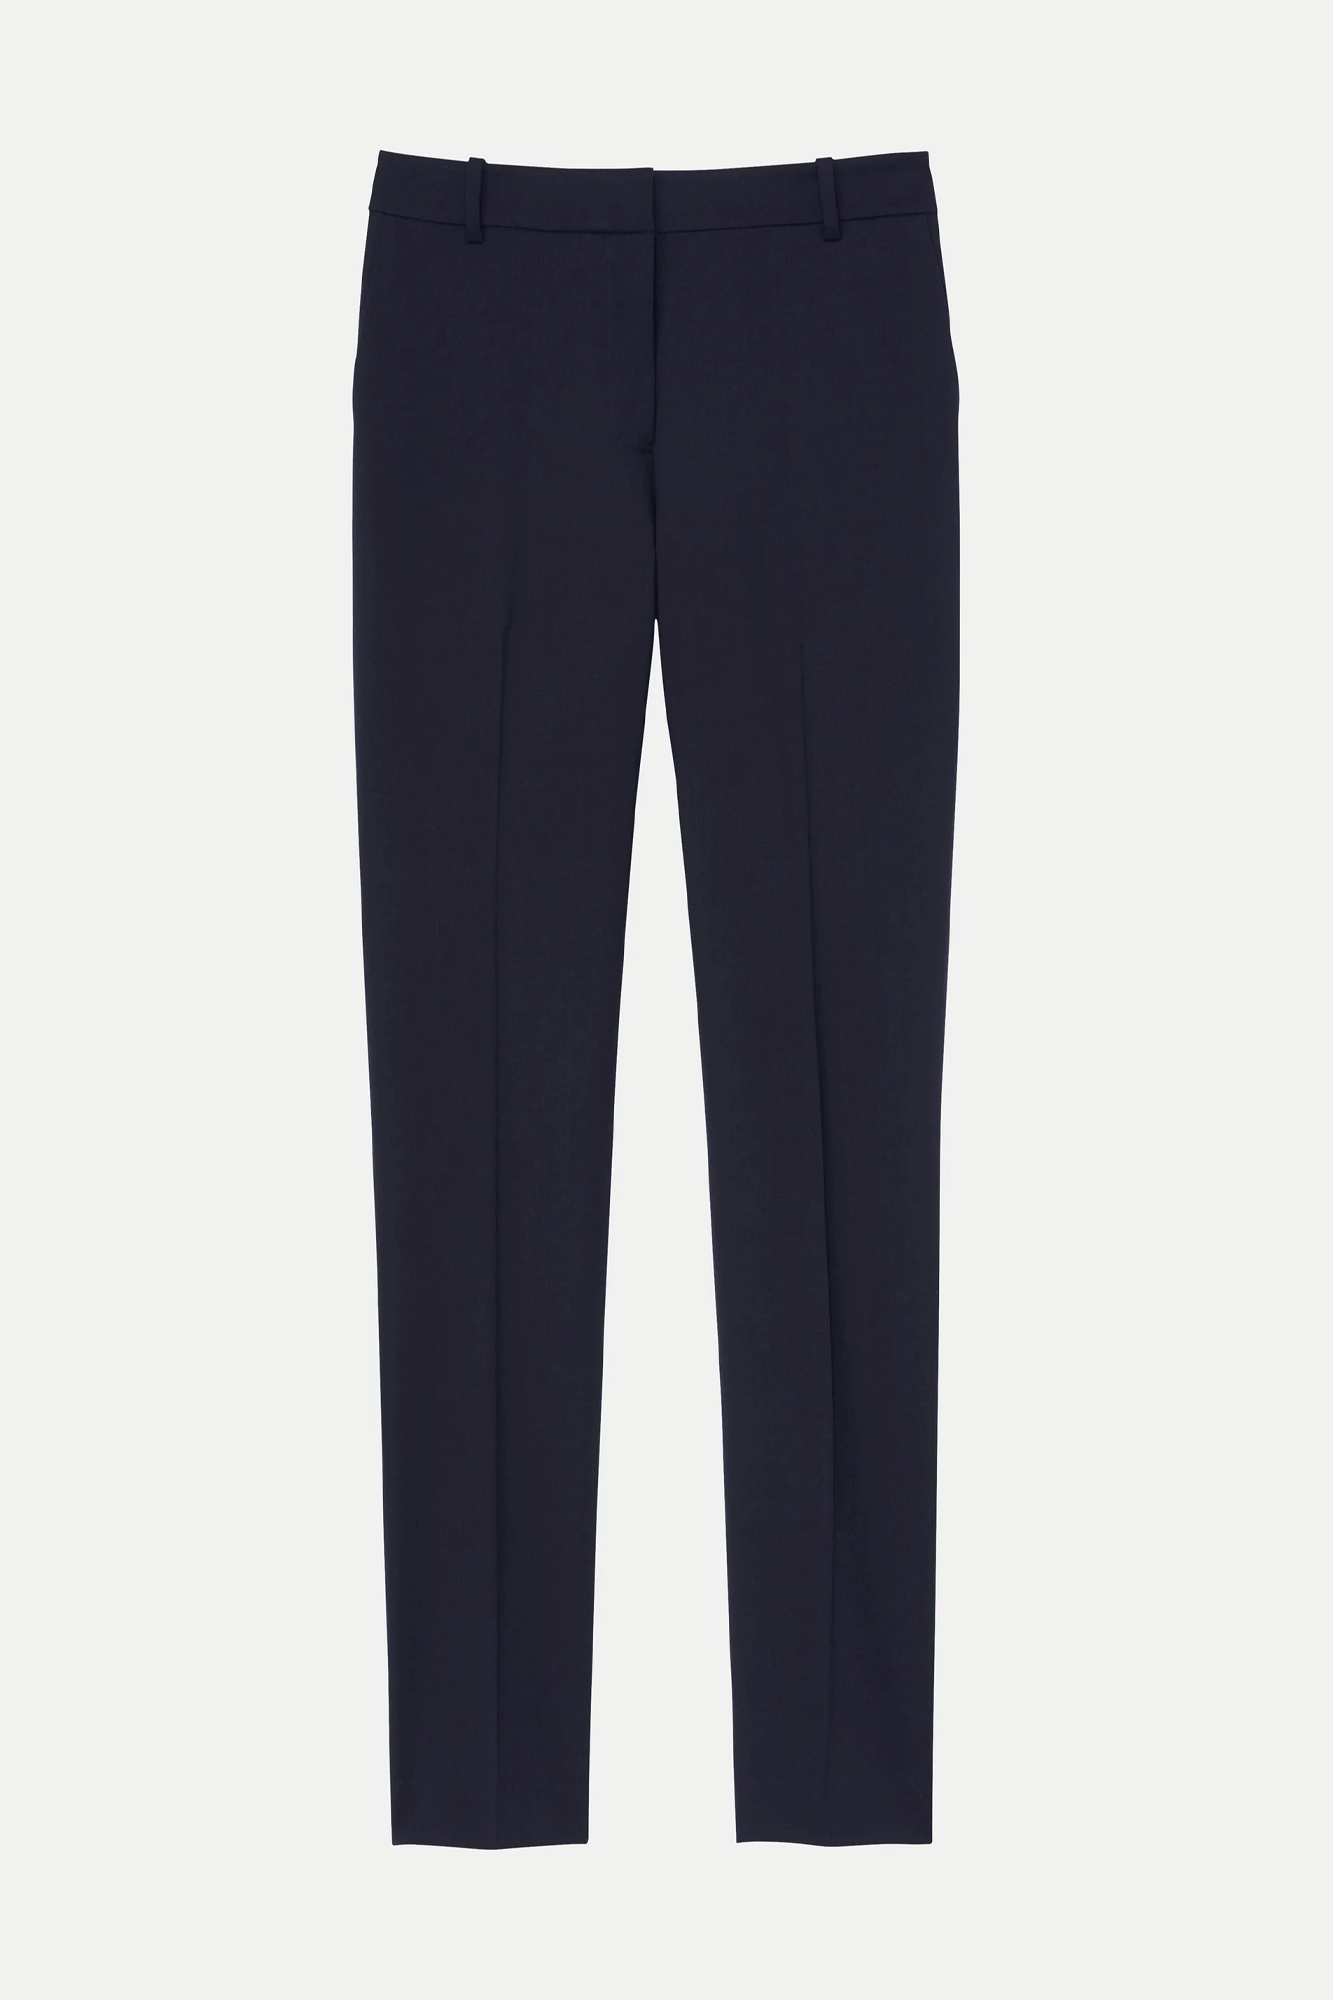 The Barrow Pant from Lafayette 148 offers a timeless style with modern sophistication. Made with Lafayette 148's Finesse Crepe fabric, this luxurious pair features a full-length, straight leg silhouette with precision darts for a perfect fit. The high-rise design creates an elongating look. Feel your best with these tailored trousers.